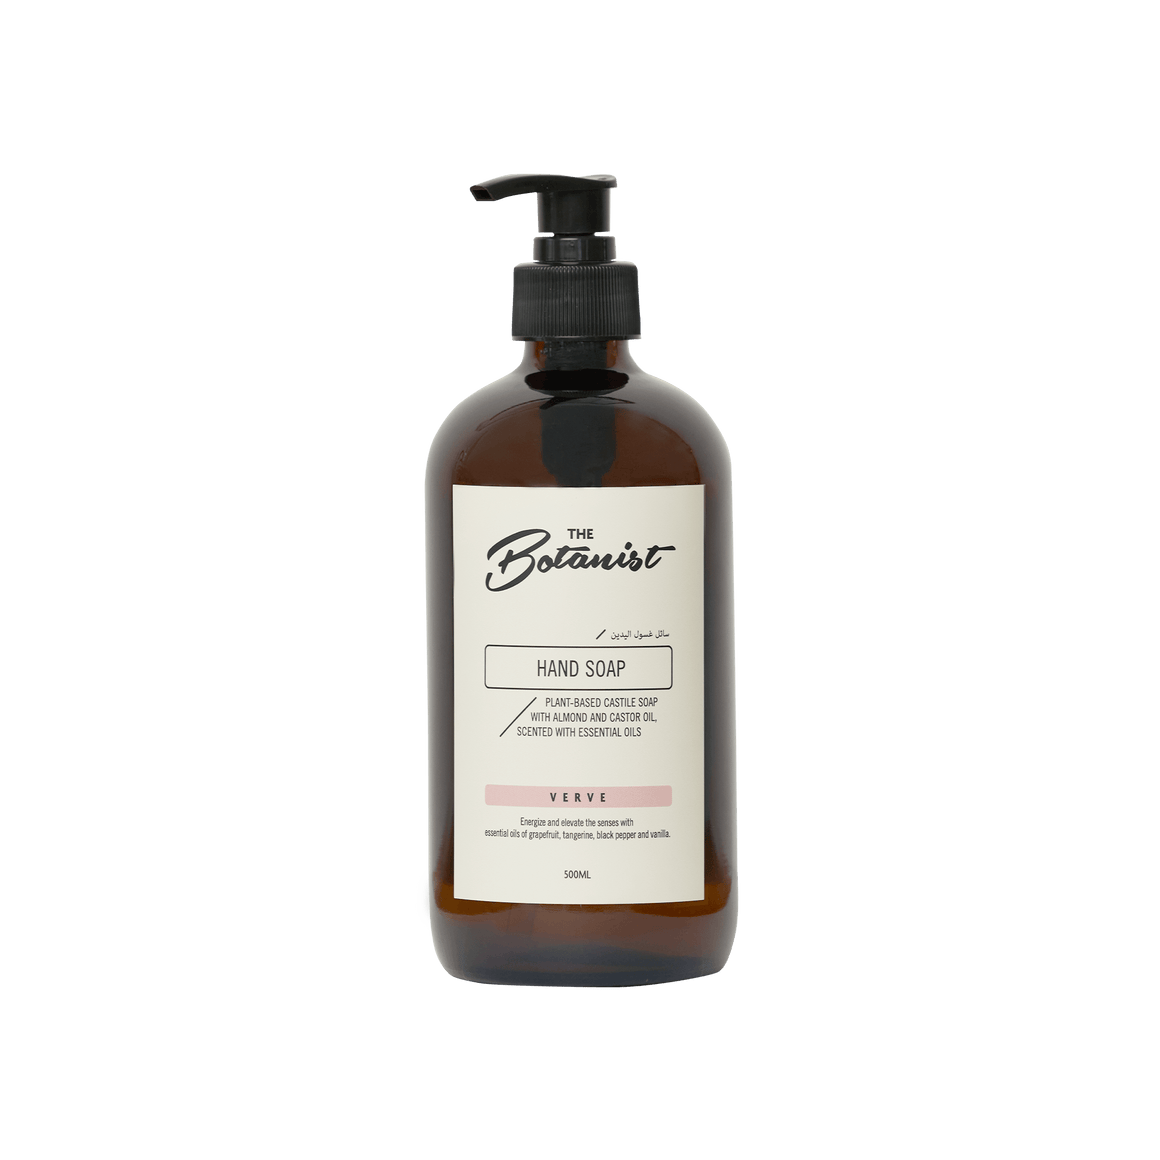 Verve Hand Soap by The Botanist